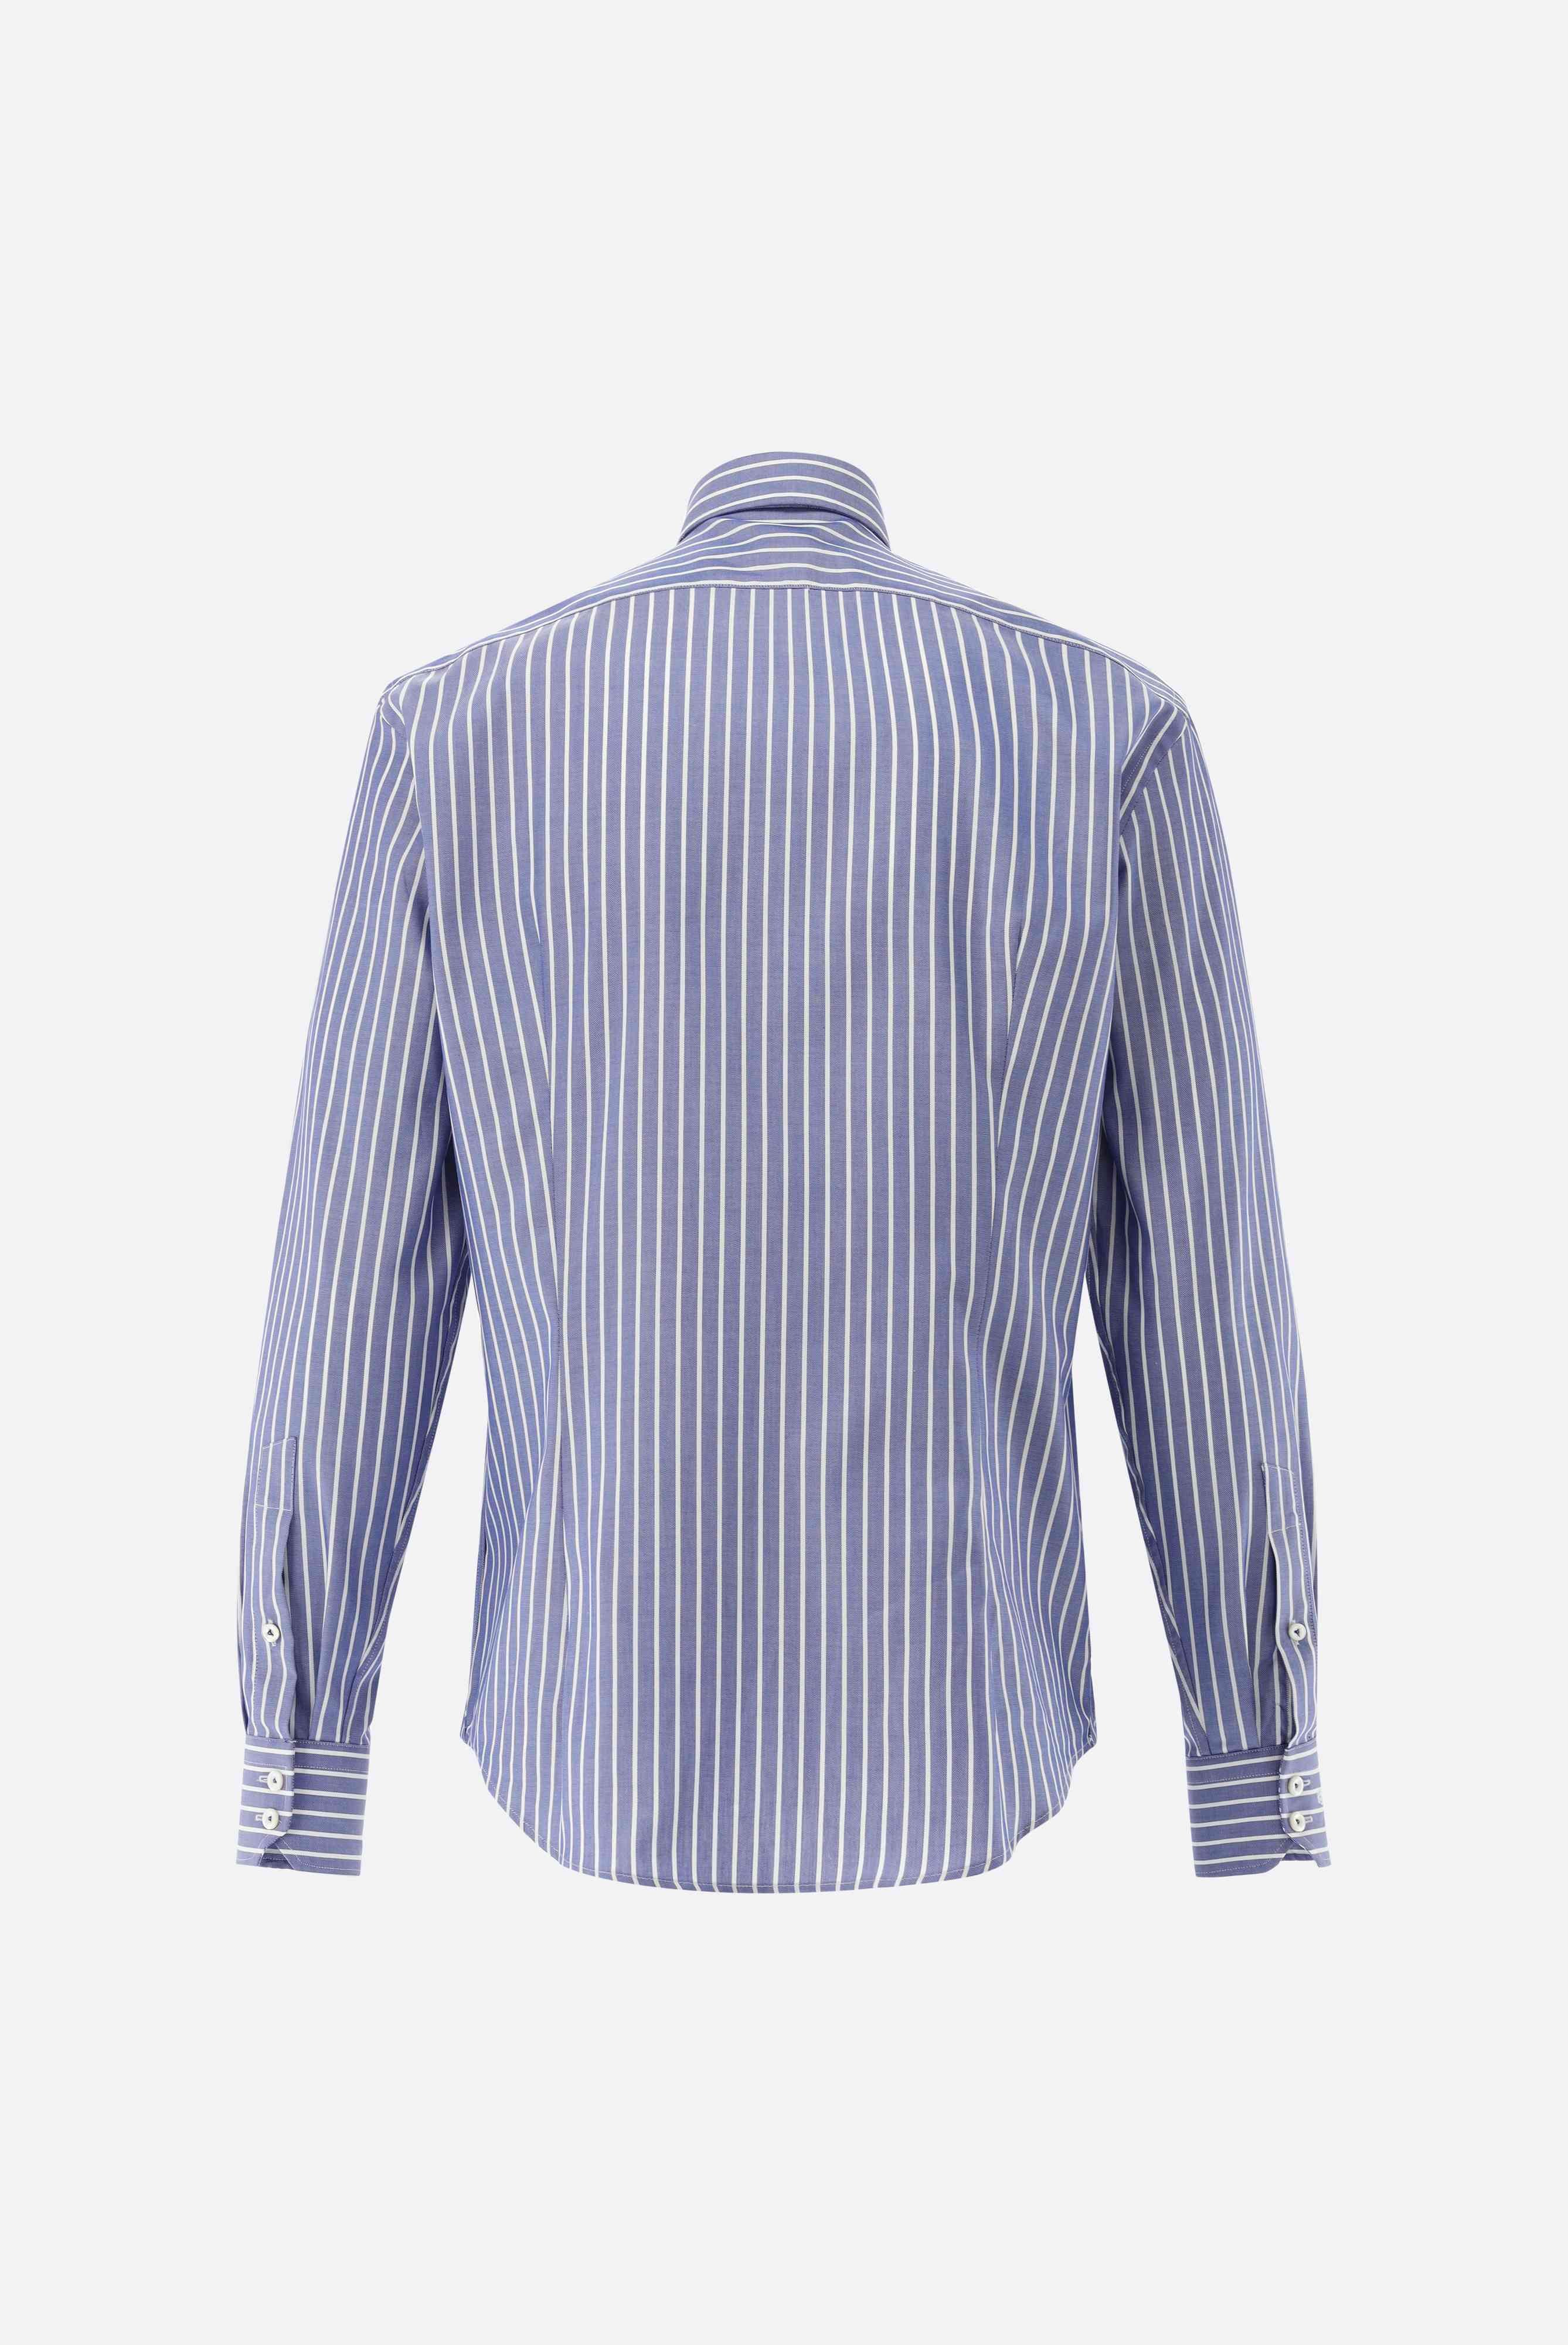 Casual Shirts+Striped Oxford Shirt Tailor Fit+20.2013.AV.151956.770.38